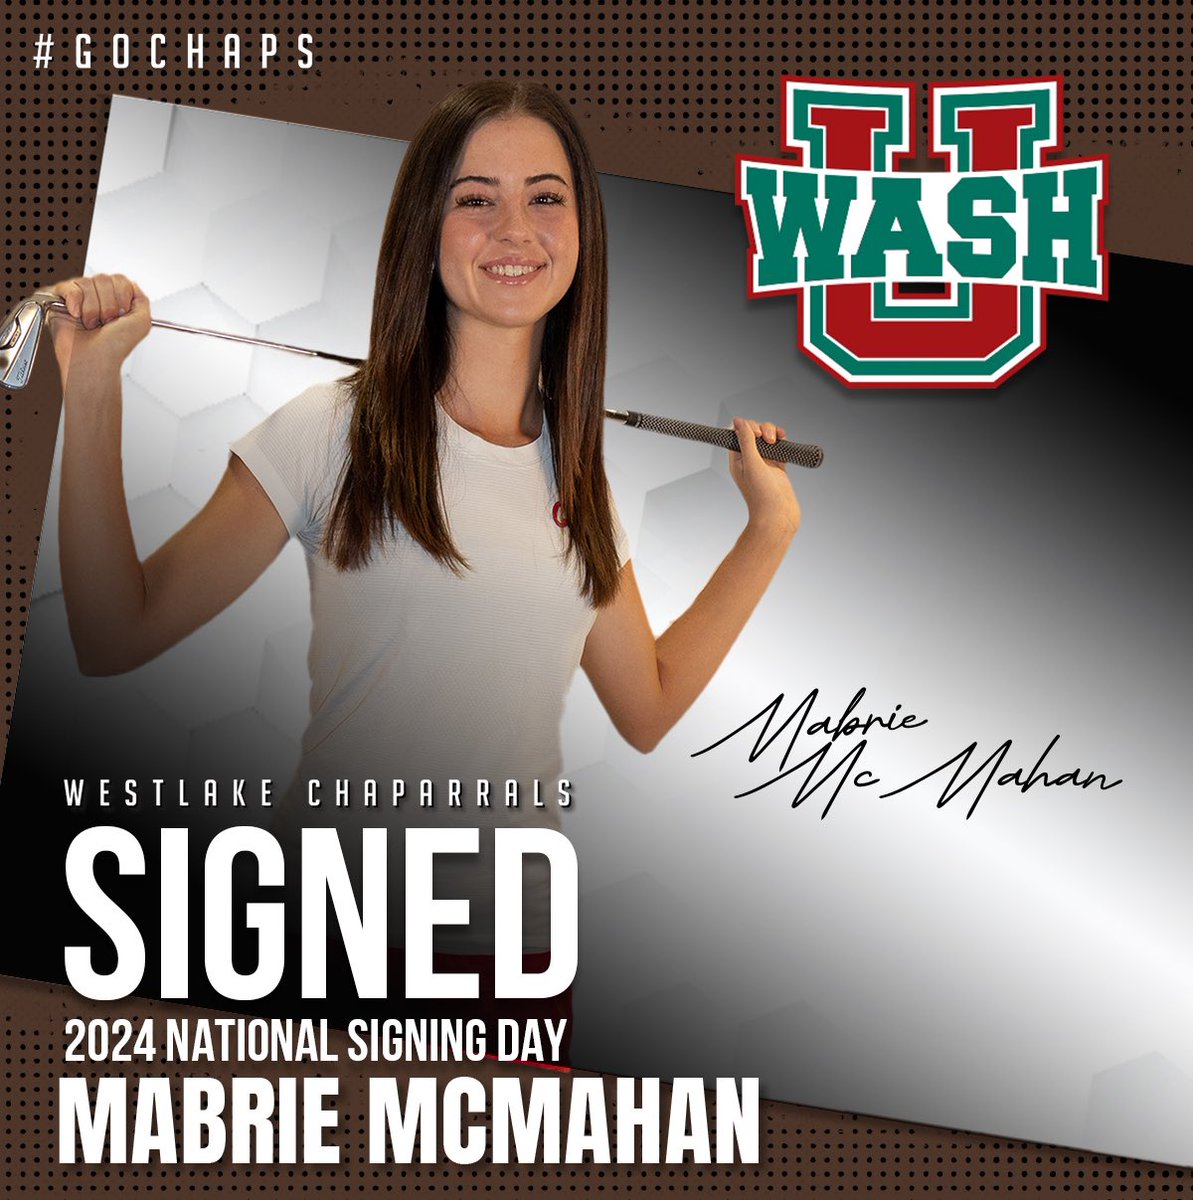 Women’s Golf competed in the Region IV Golf Tournament during our spring signing day. Today, we’re thrilled to report that Mabrie McMahan will continue her academic and golf career at Washington University in St. Louis. Congratulations, Mabrie. #GoChaps #BattleOn